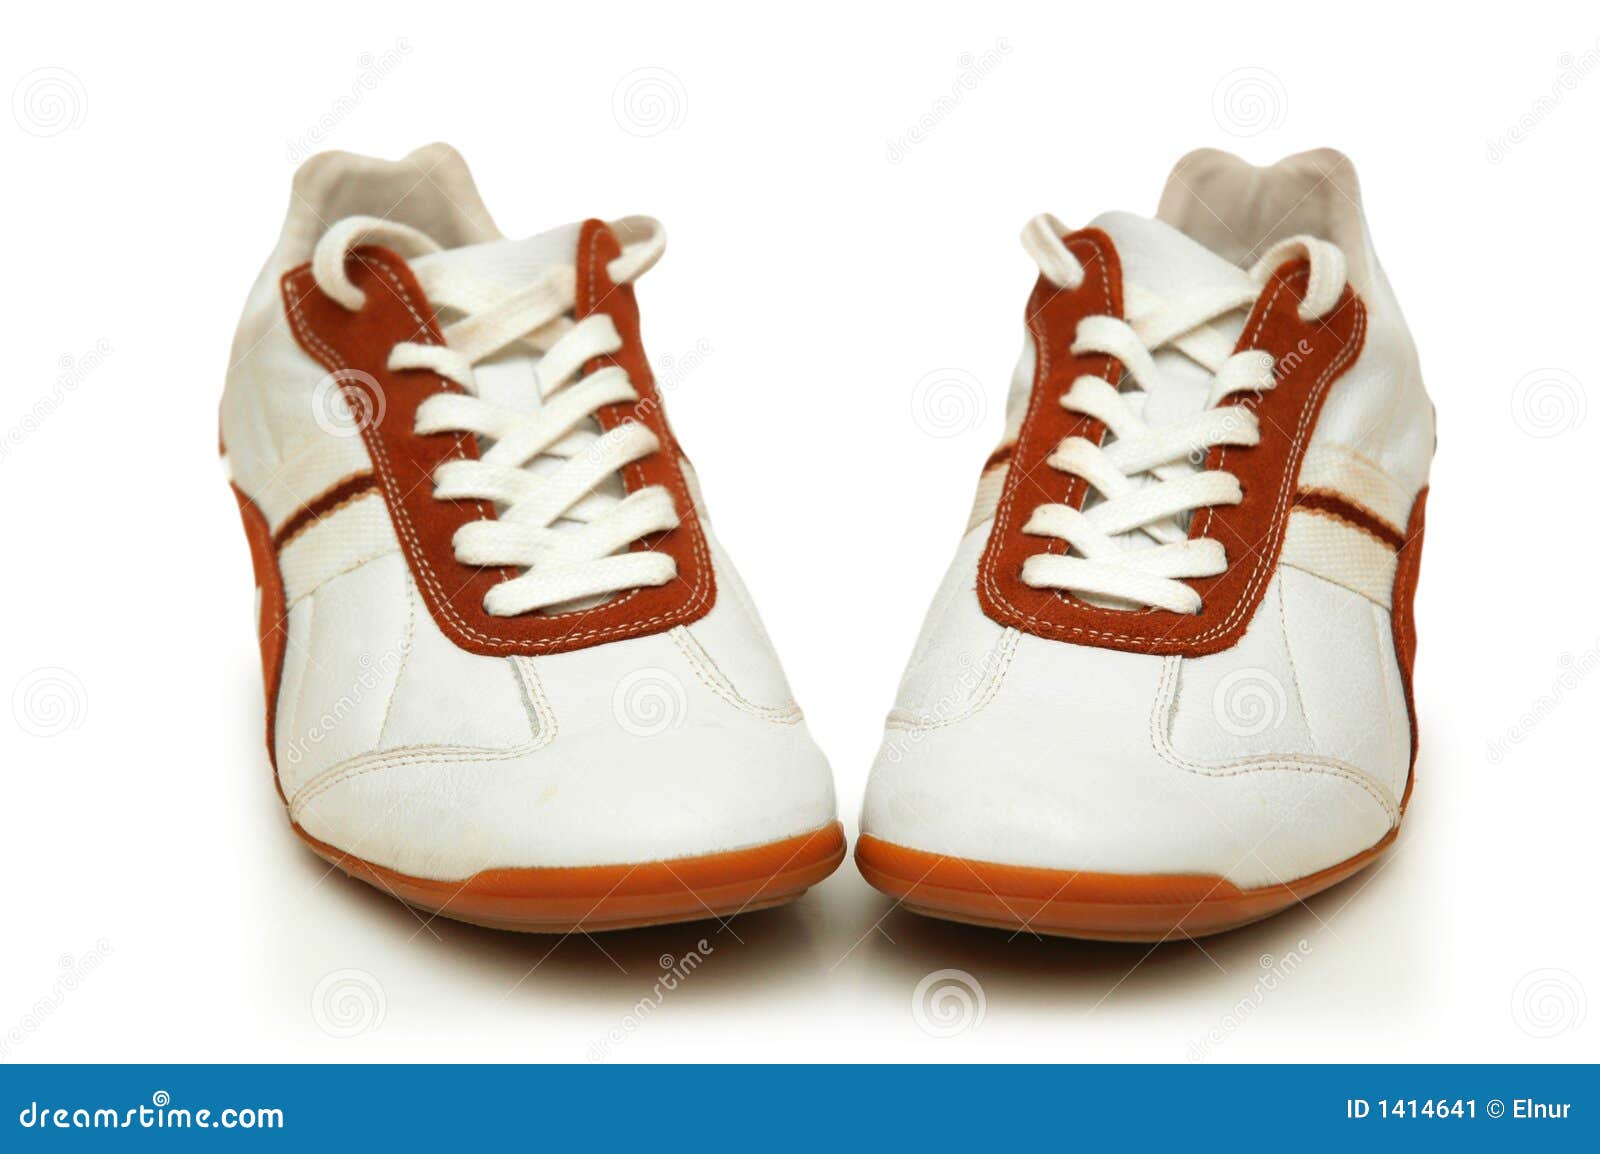 Pair of white trainers stock image. Image of shoes, recreational - 1414641